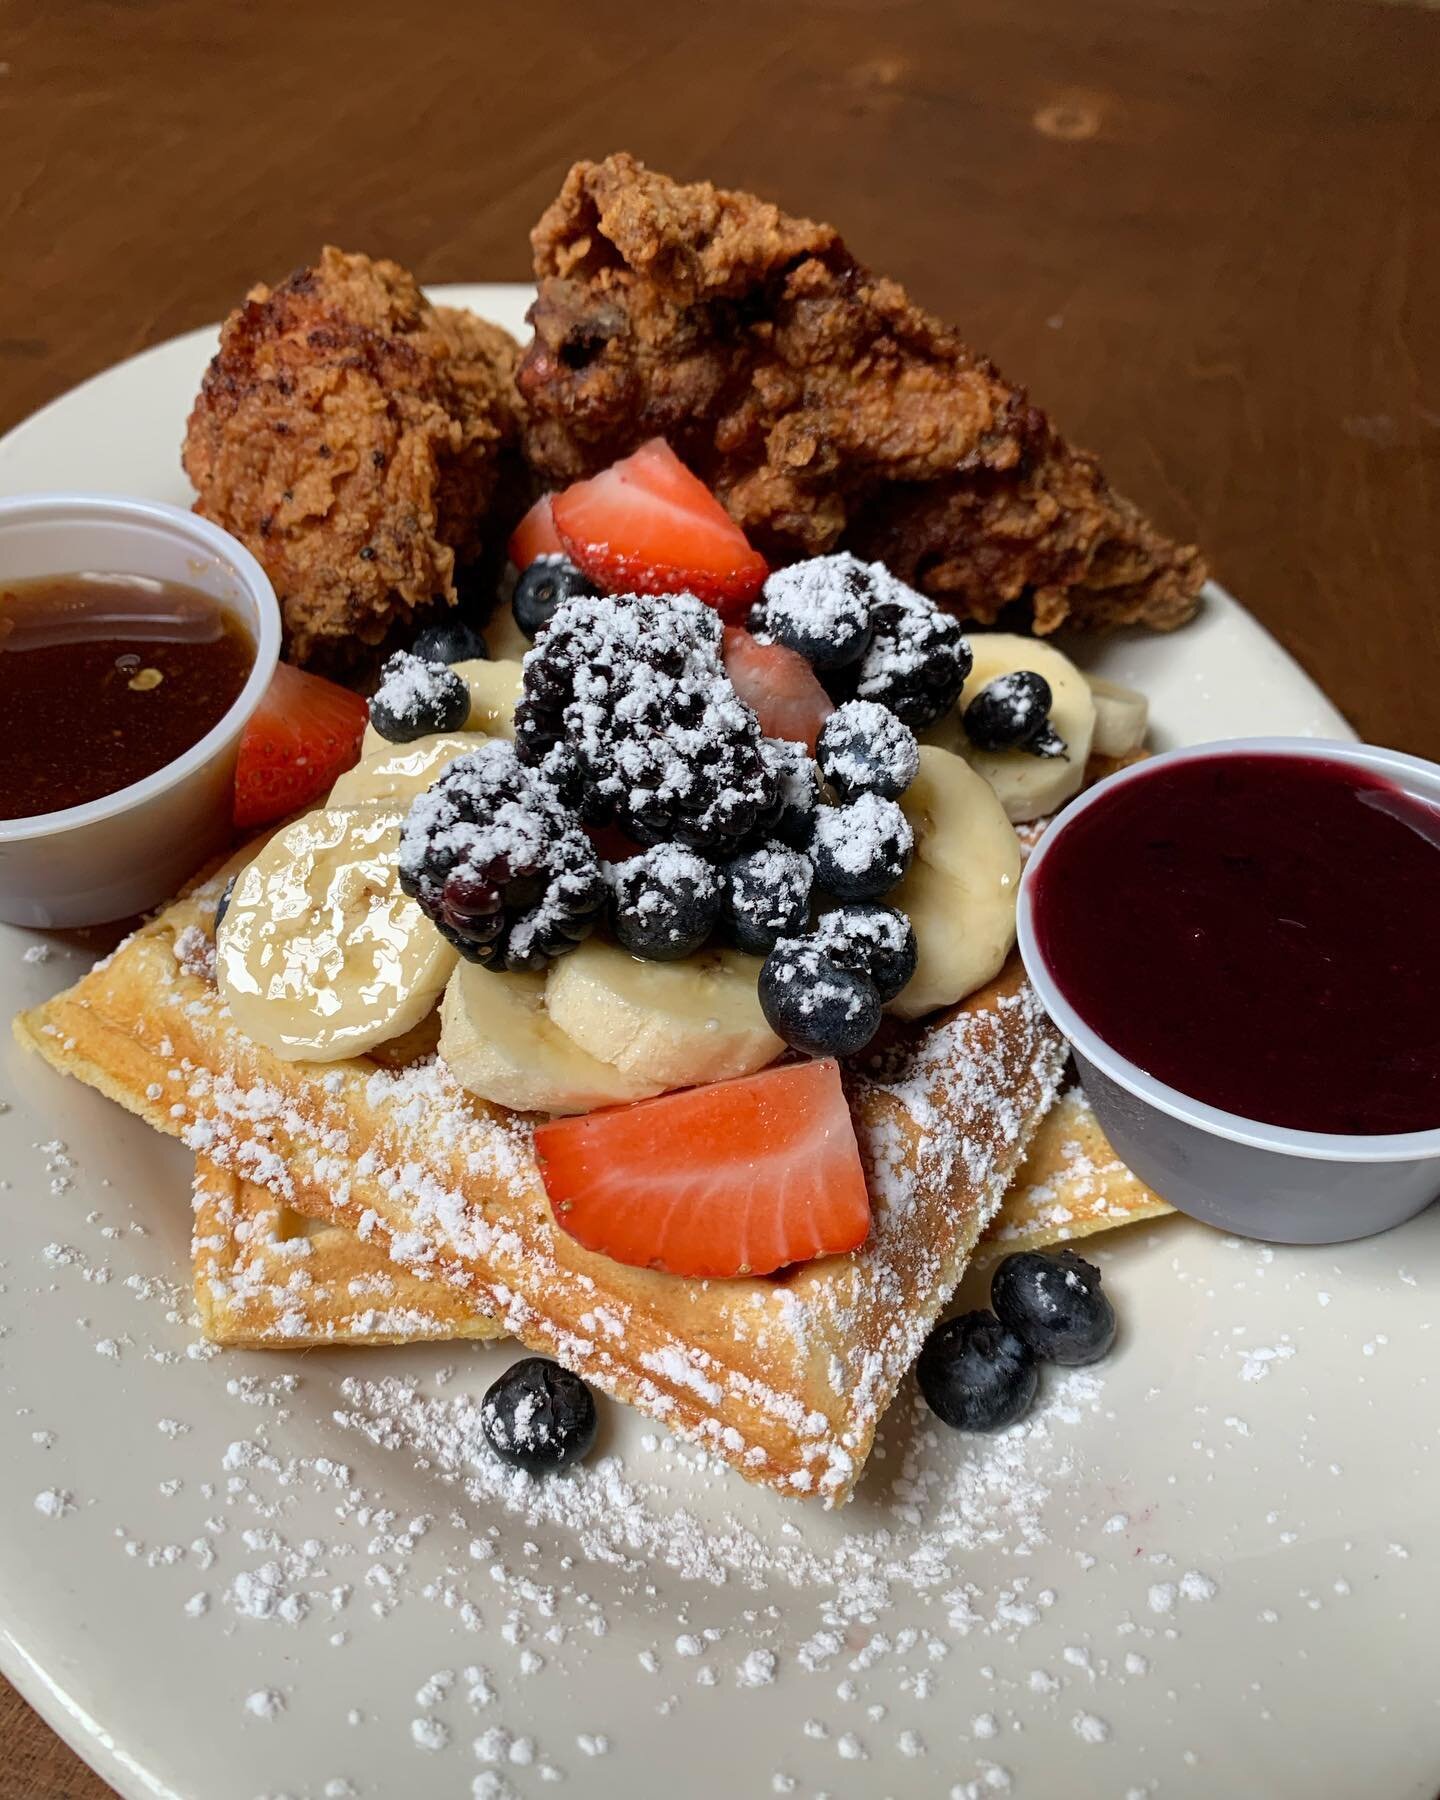 Happy SUNDAY-FUNDAY!!! Brunch day 2 out of 3 today!!!! That&rsquo;s right! We are serving brunch again tomorrow (Monday) for the holiday! 

We open at 11AM today for brunch, come enjoy some Fried Chicken &amp; Cornbread Waffles. 

#brunchsohard #nycb